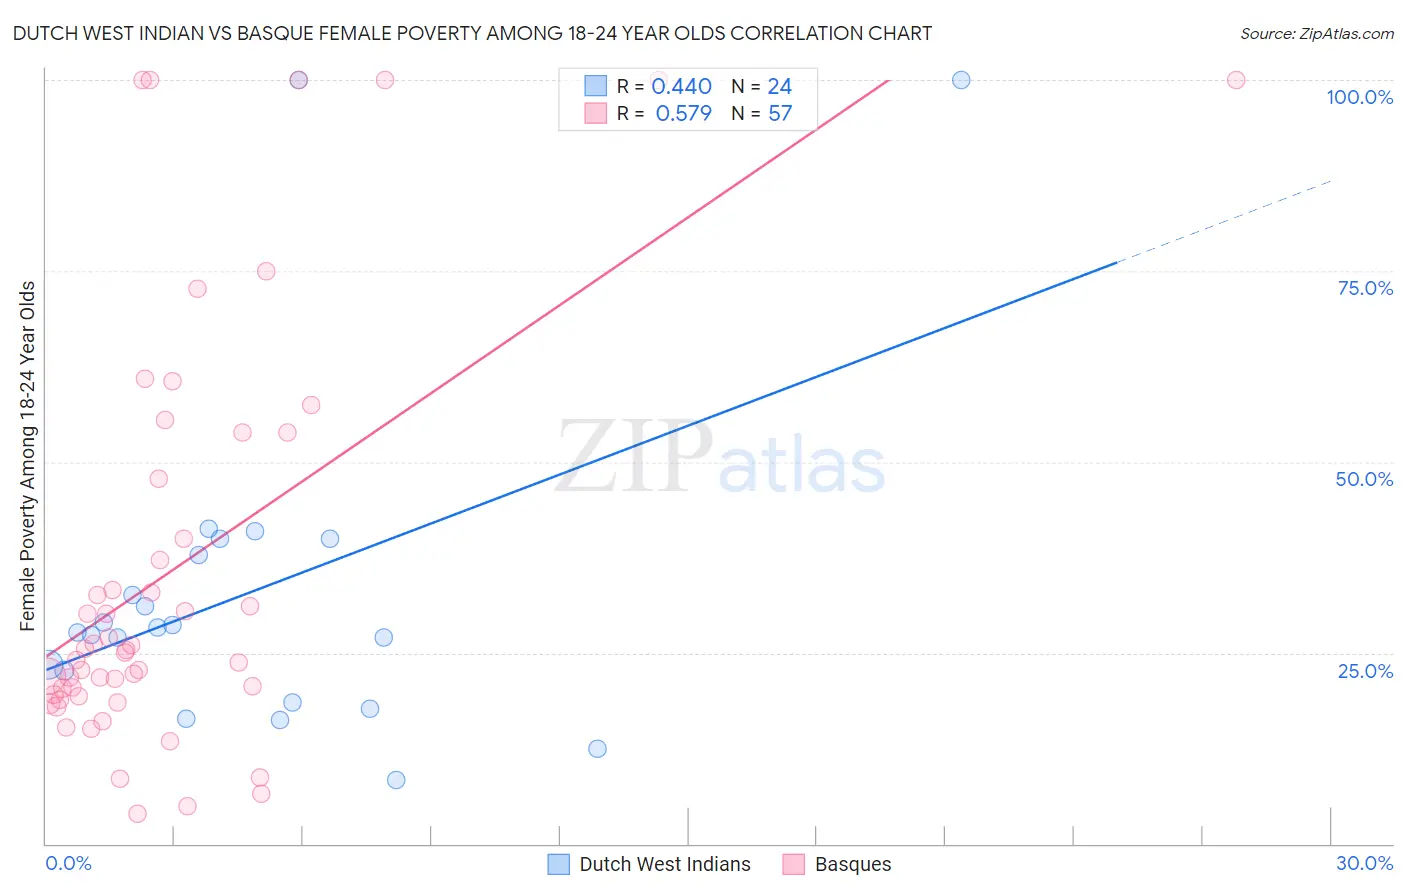 Dutch West Indian vs Basque Female Poverty Among 18-24 Year Olds